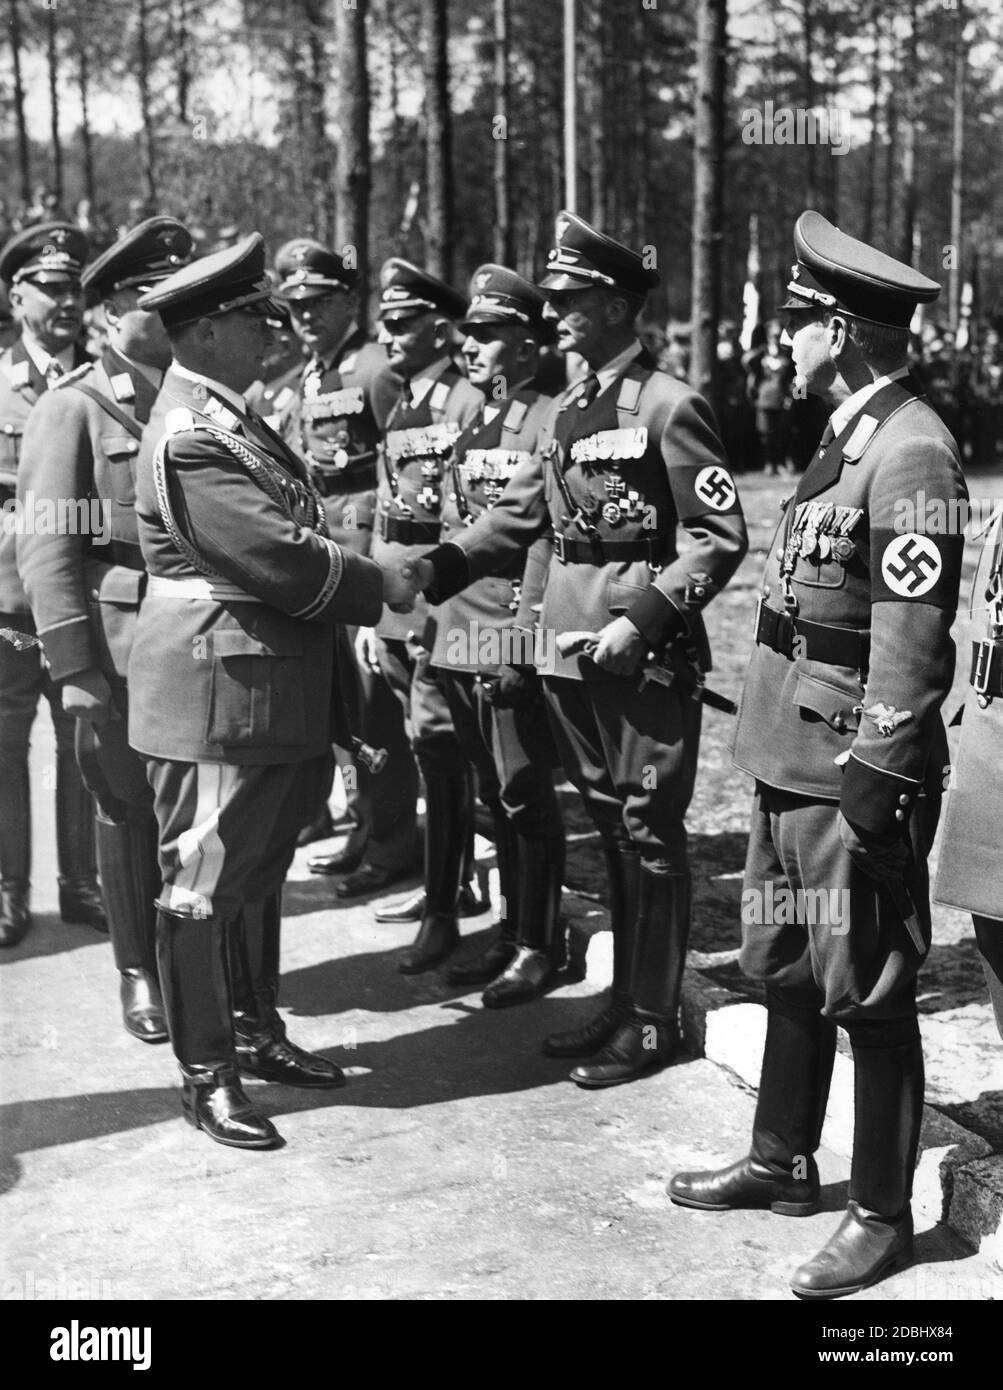 Field Marshal Hermann Goering welcomes the regional leaders of the Reichsluftschutzbund (National Air Raid Protection League) at the ceremonial inauguration of the Reichsluftschutzschule (National Air Protection School) Berlin-Wannsee in 1939. Stock Photo